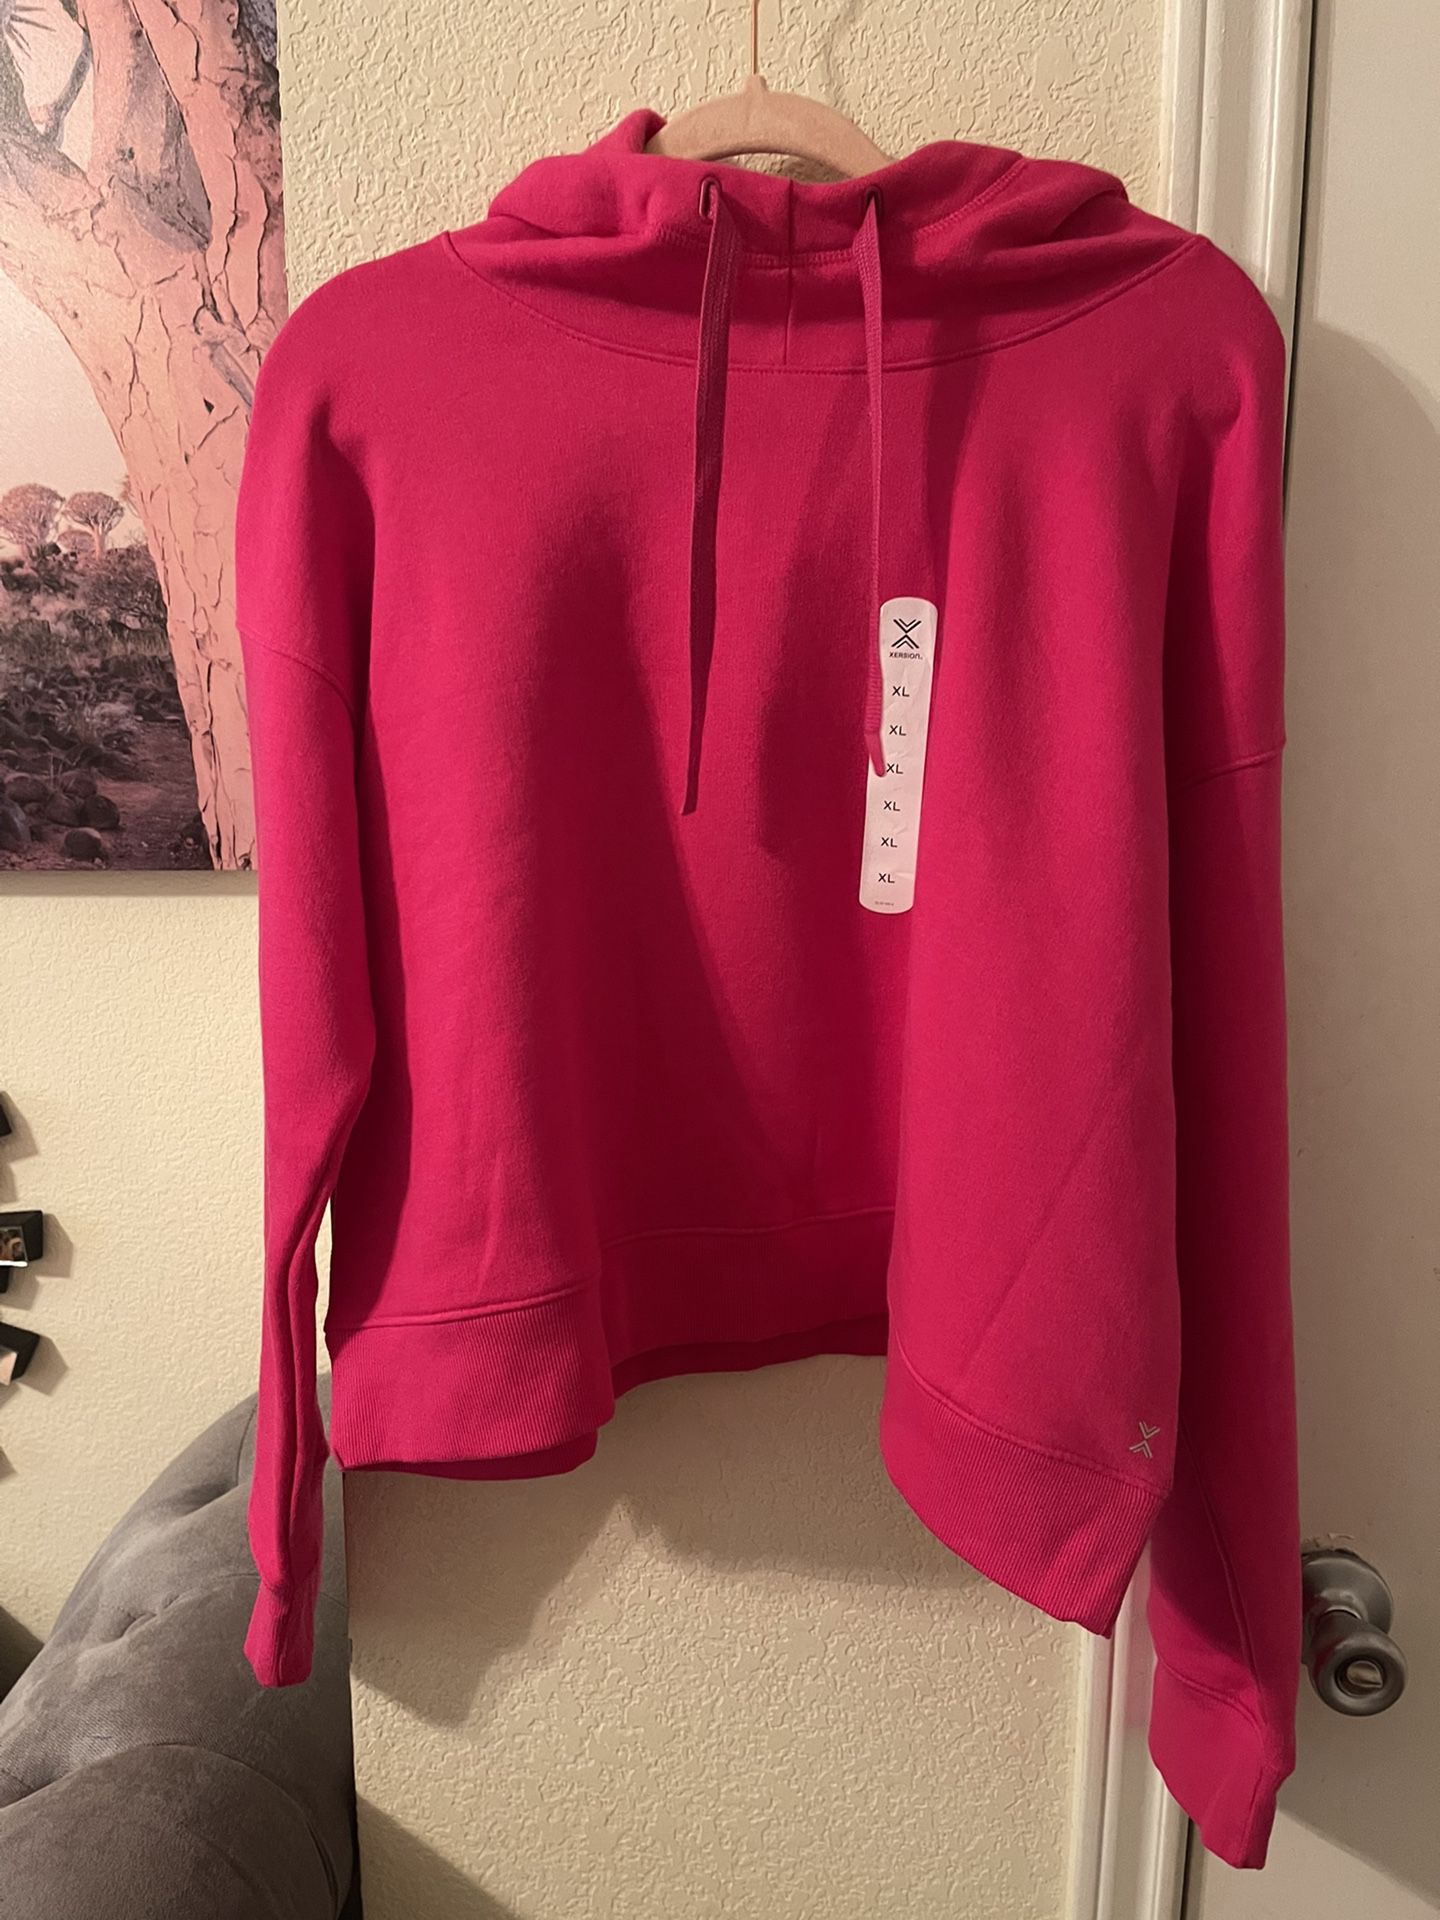 Cute bright pink hoodie size XL new 